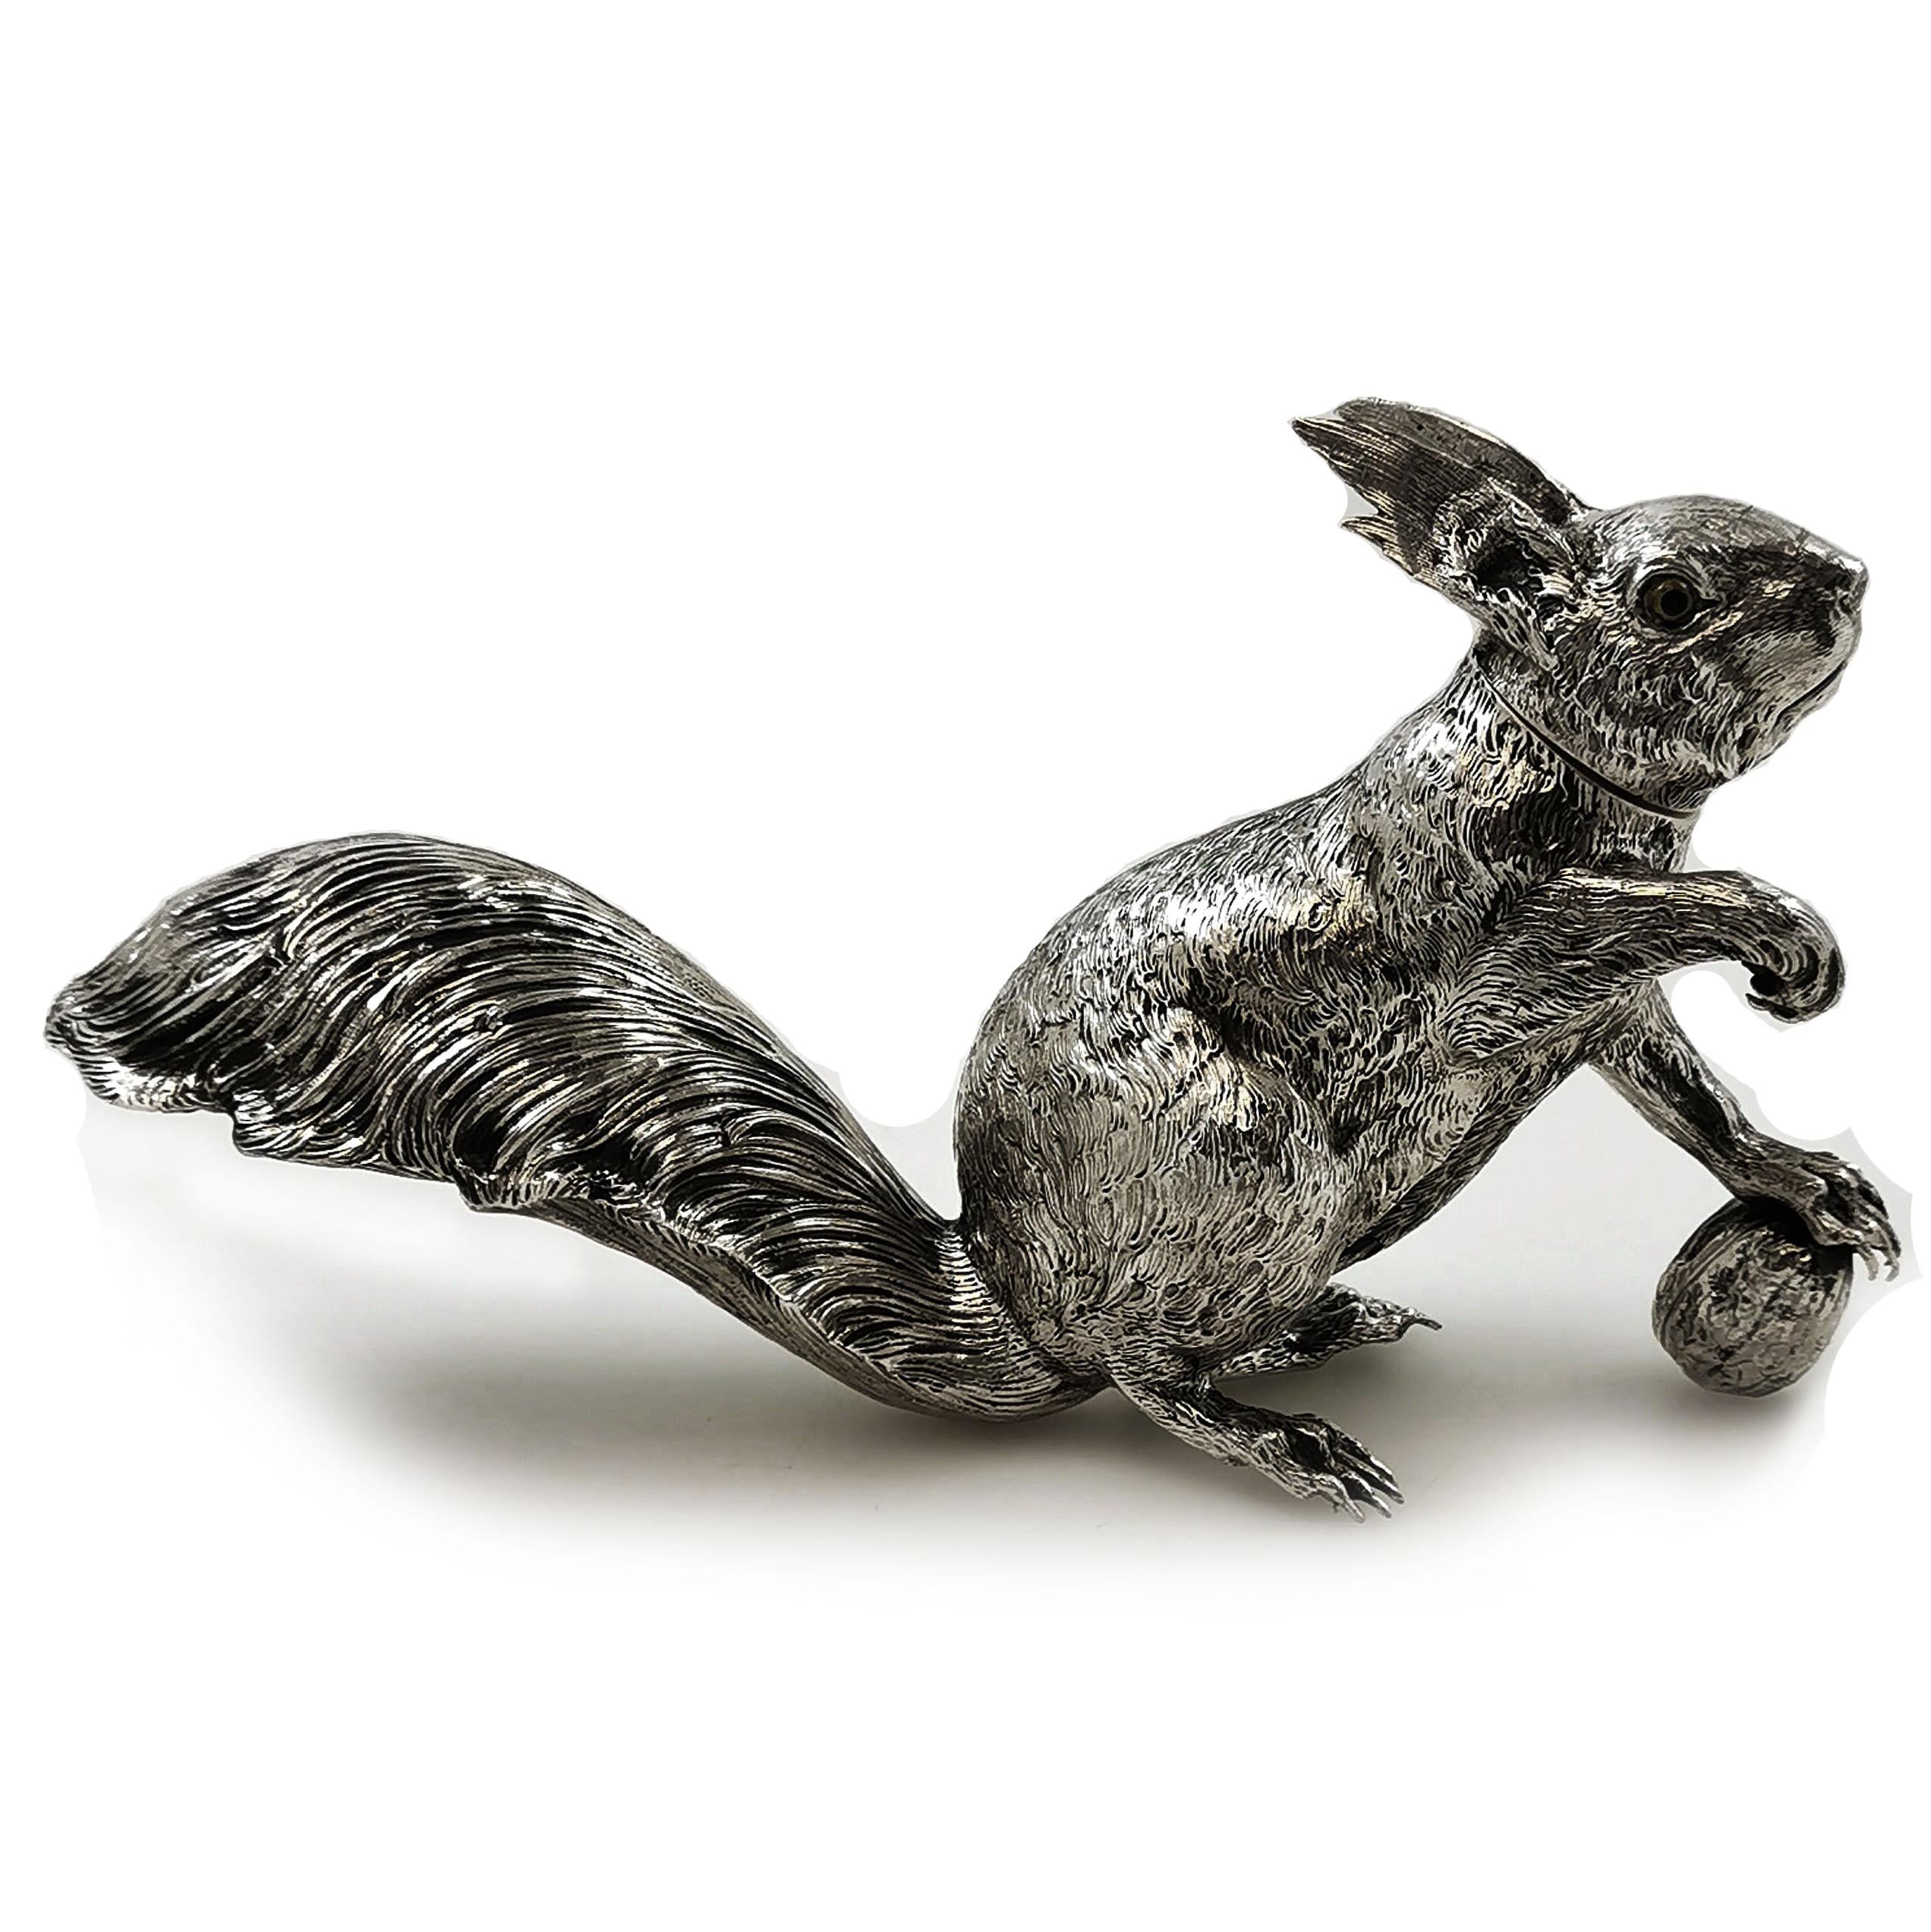 A gorgeous Antique German Solid Silver model Squirrel standing with his one paw resting on a nut and the other raised in the air. The Squirrel has a full busy tail and splendid ears. The Squirrel has inset yellow and black glass eyes. This Figure of